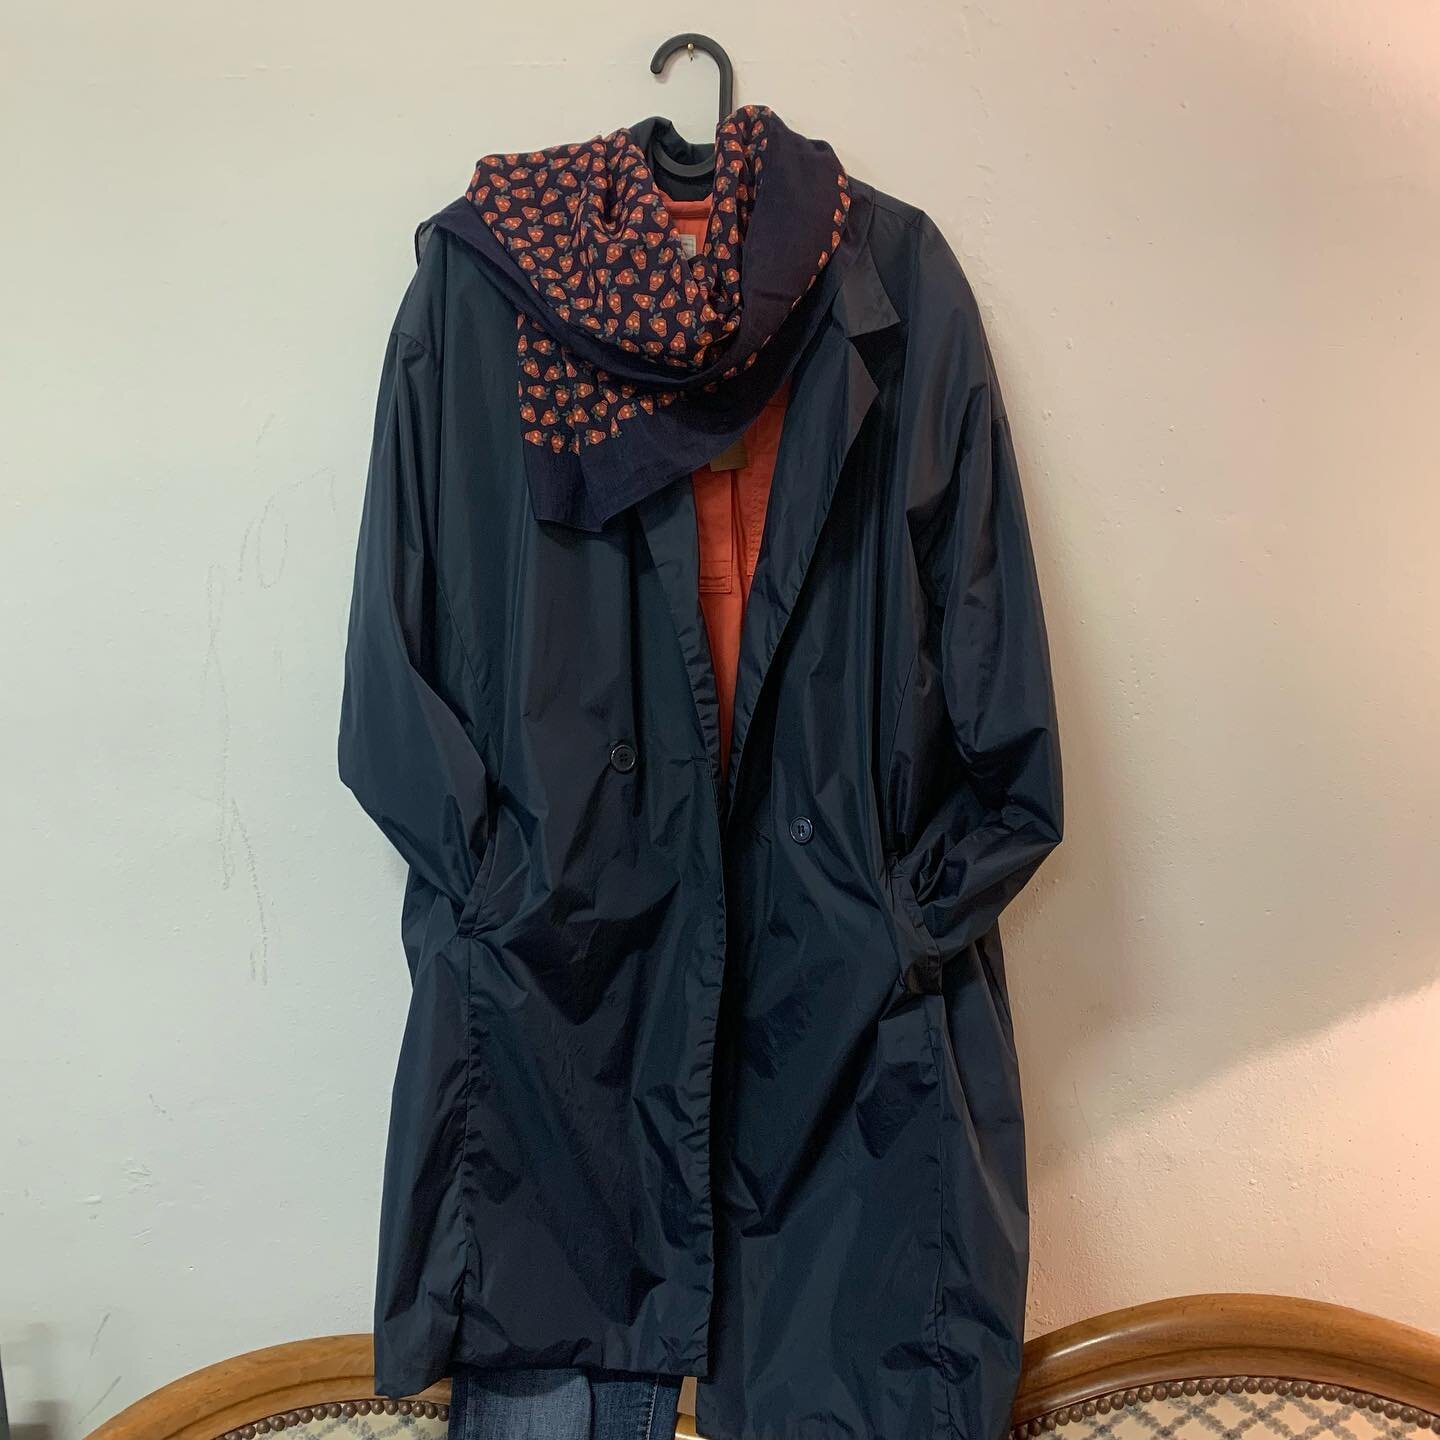 We love rainy days 🌧️🌧️🌧️

Manteau American Vintage bleu fonc&eacute; / taille M /,CHF 69.- 
Chemise Gap orange / taille L/ CHF 29.- 
Foulard Paul Smith / CHF 24.-
Jeans Sessun bleu / taille 36 / CHF 44.- 
Sneakers Adidas Stan Smith Pharell Willia